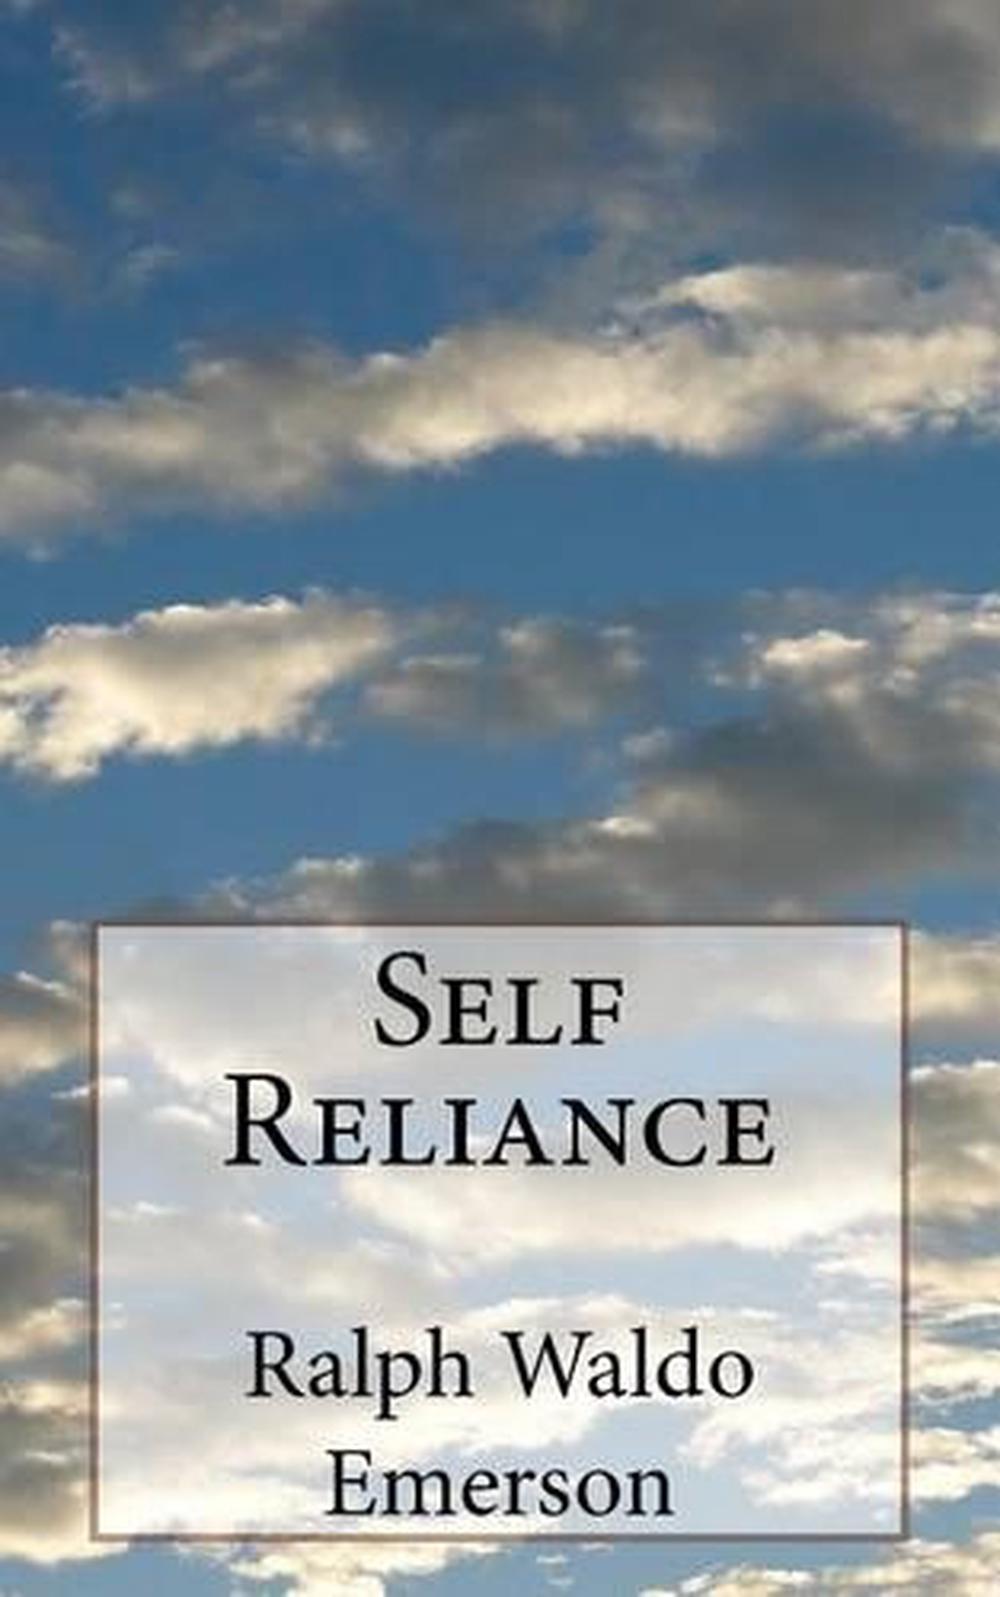 The Reliance by M.L. Tyndall